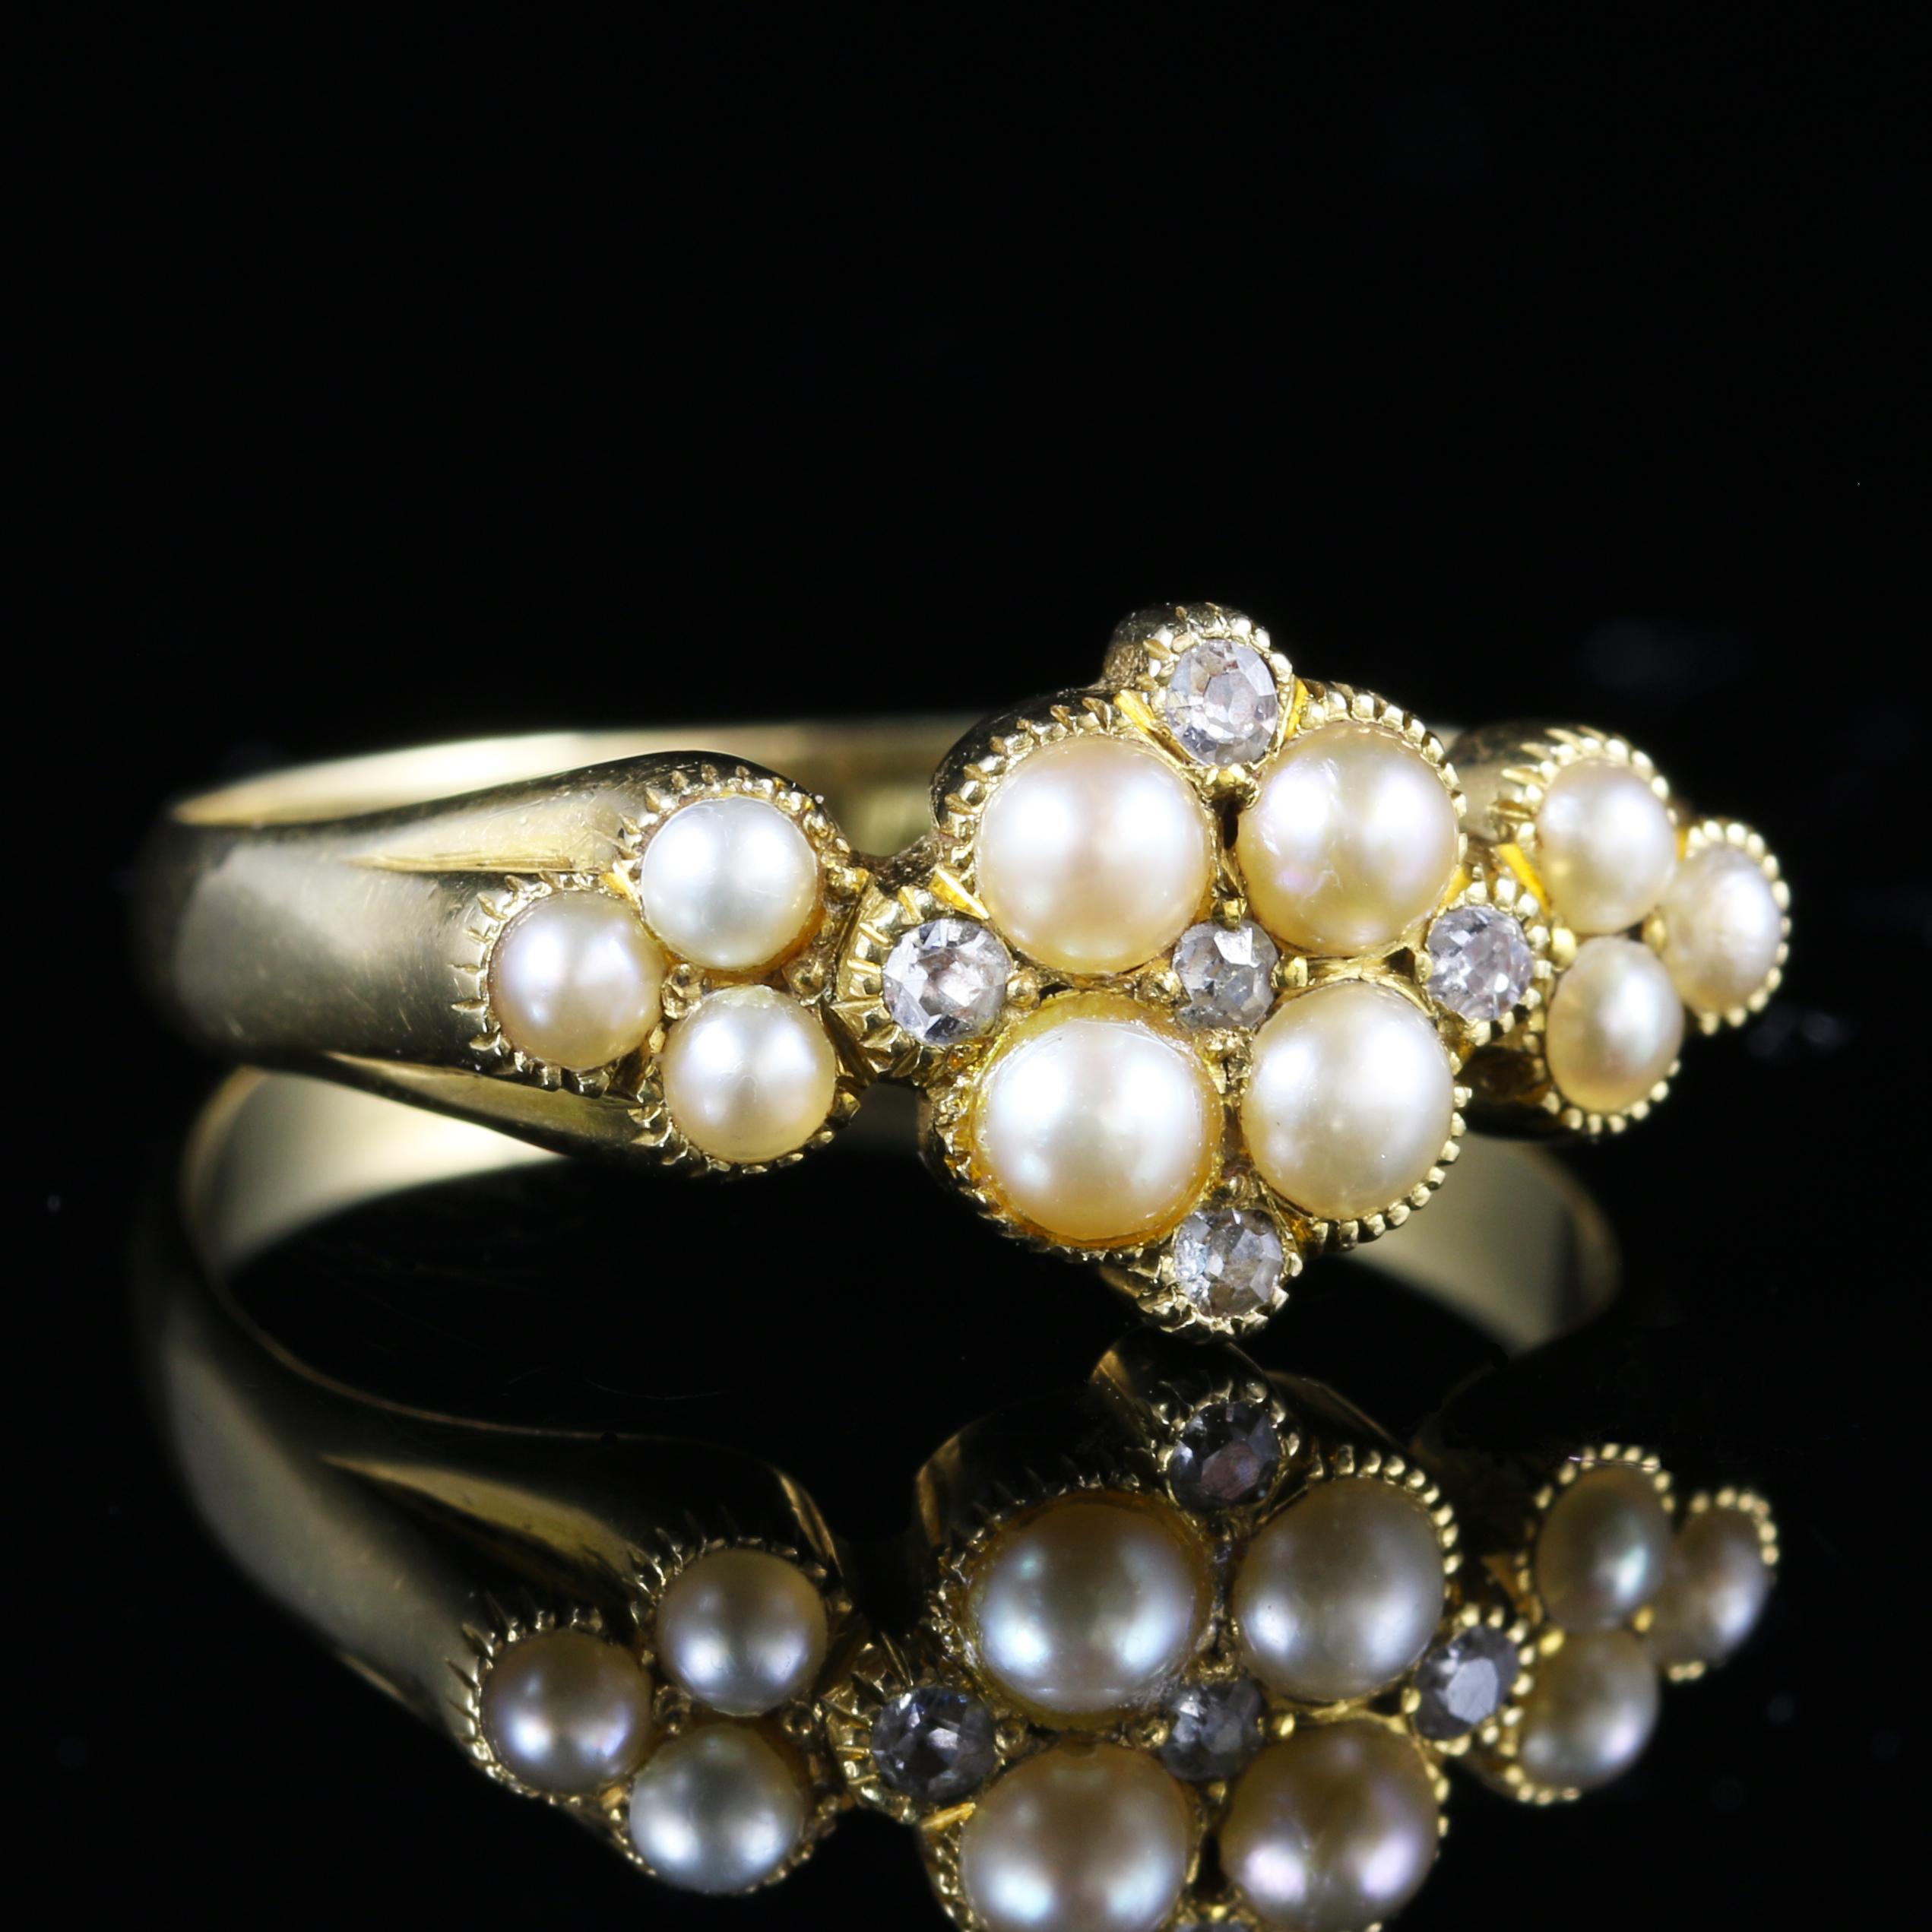 For more details please click continue reading 

This genuine original Victorian Pearl and Diamond ring is Circa 1860

Ten fabulous rich creamy Pearls adorn this ring set with Diamonds. Pearls have a wonderful lustre with a rich creamy tone, they